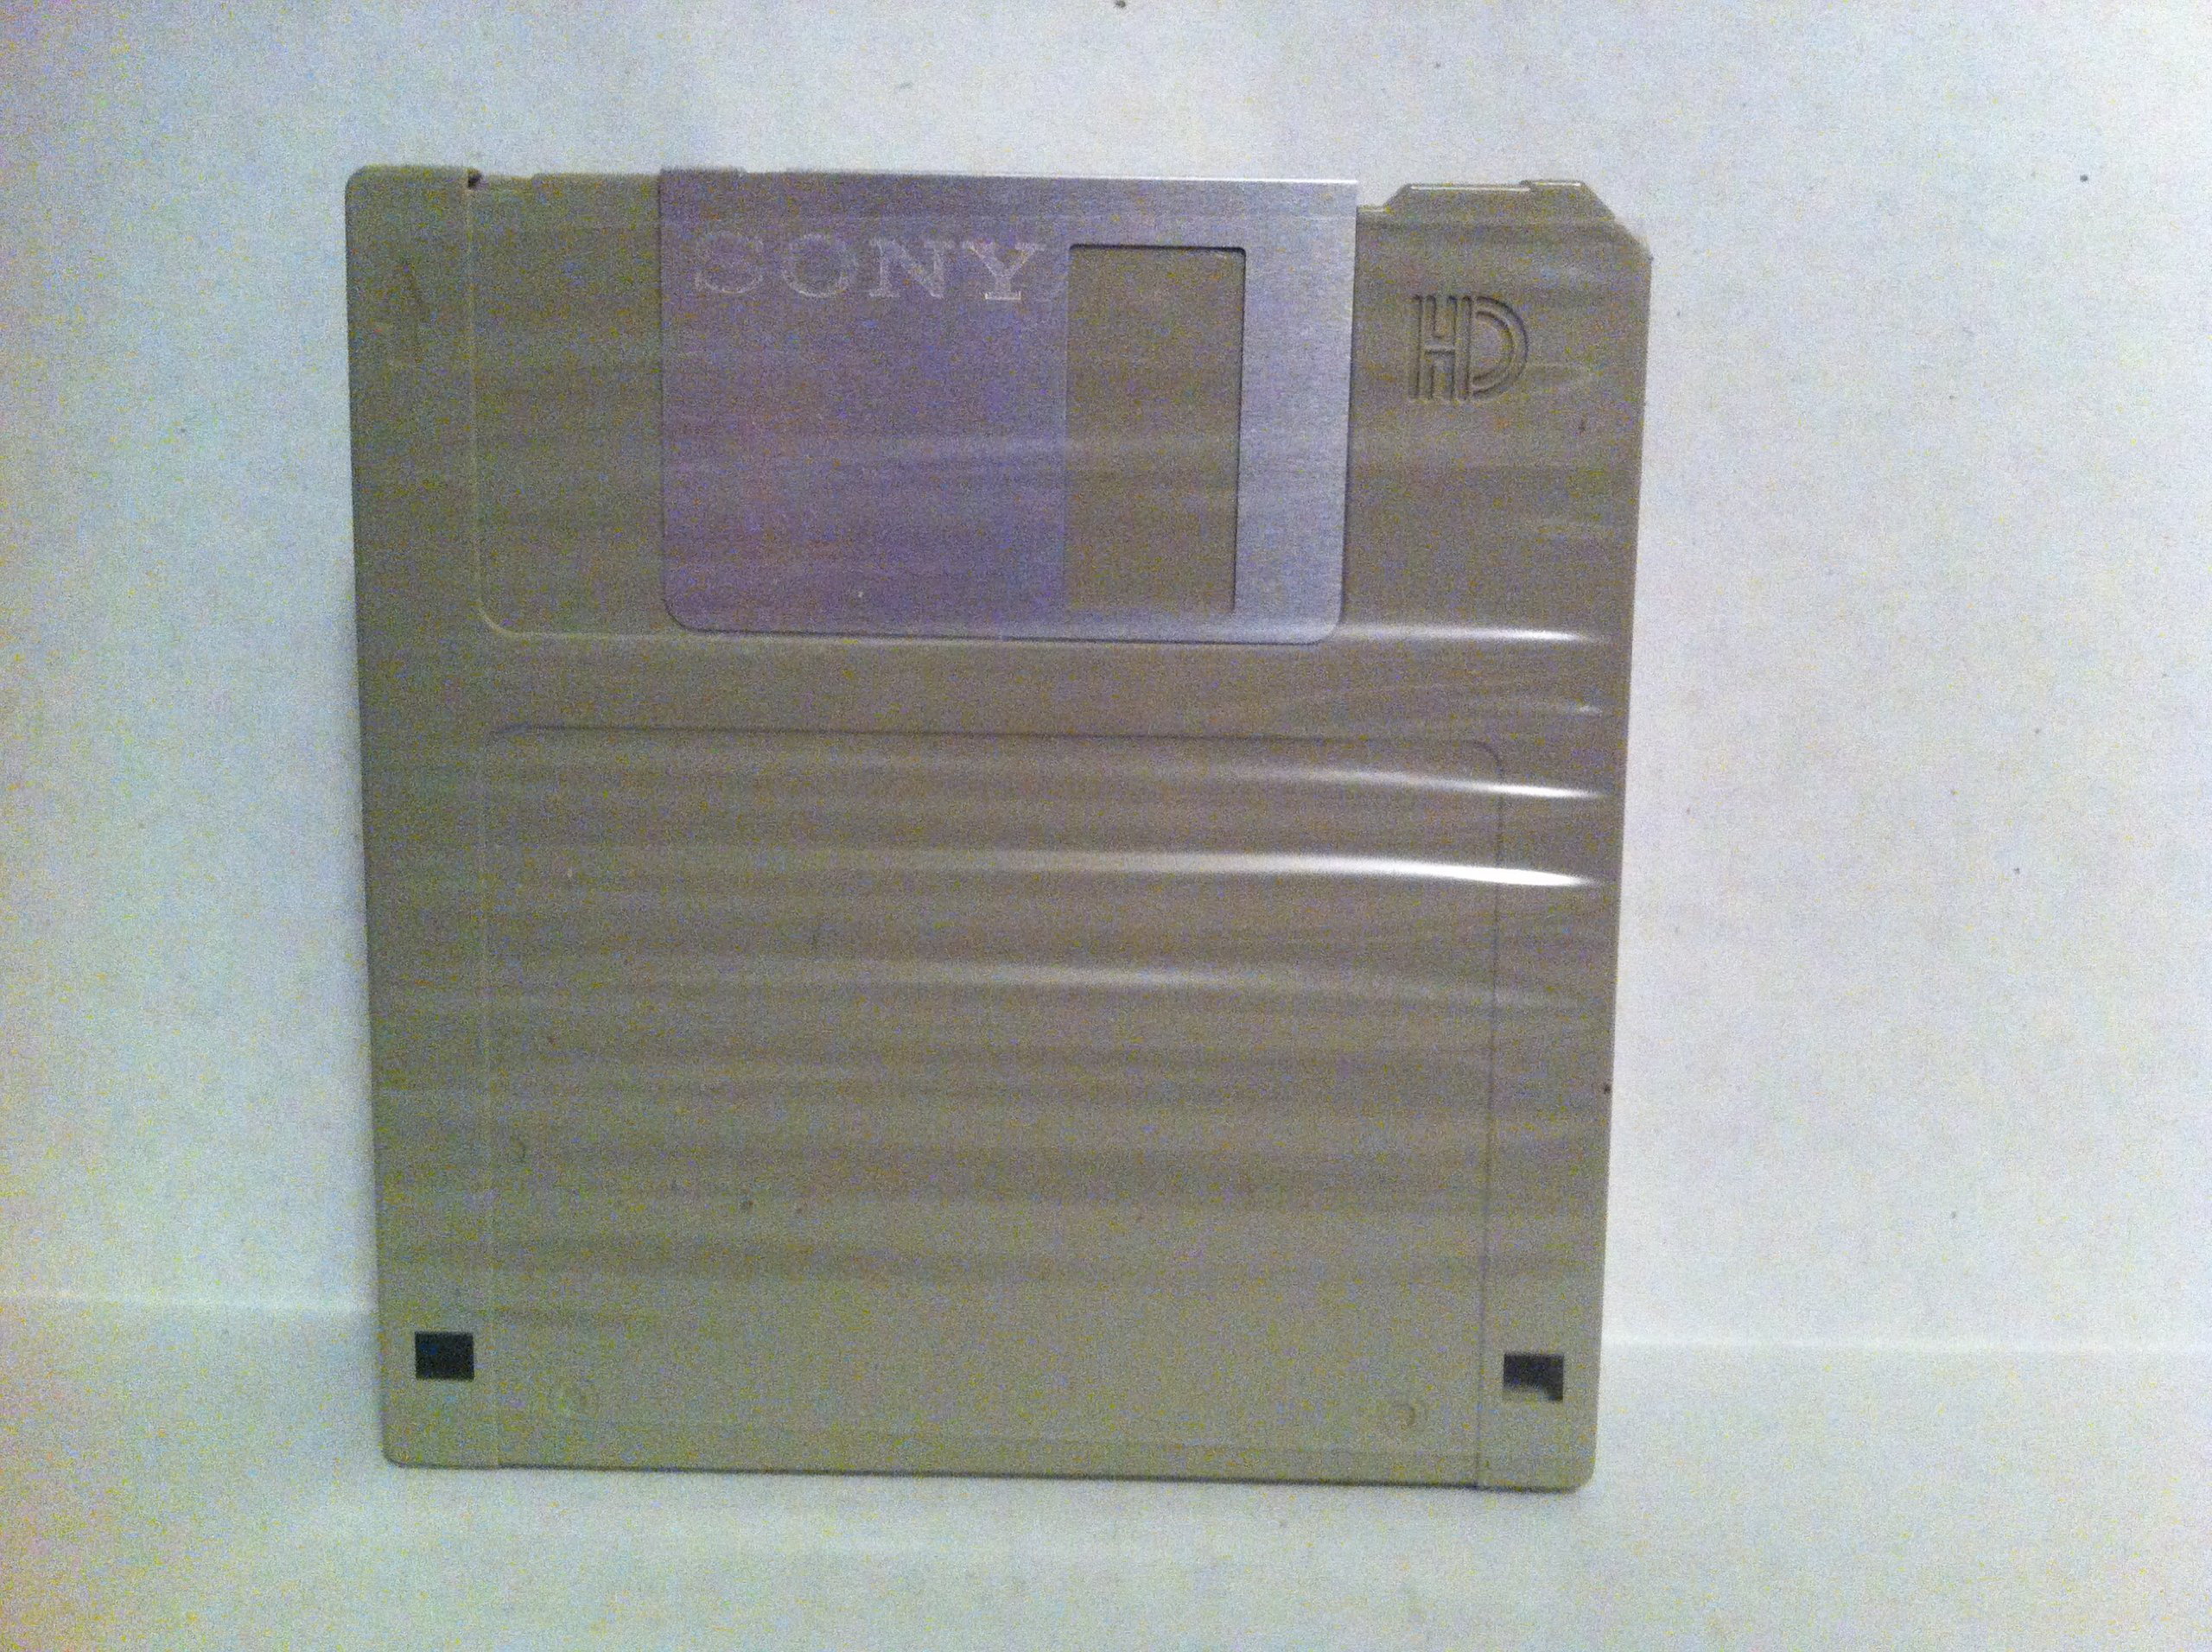 1995 Sony Electronics, Inc. Sony Micro Floppy Disk/double Sided 10mfd-2hdcf 10 Pack Blister Box Packagecapacity IBM Formatted 1.44 Mb 10 Packspecifications Trackes Per Inch 135 Tpi, Number of Tracks-80/side Double Side/high Densitycompatibility Is All Ibm